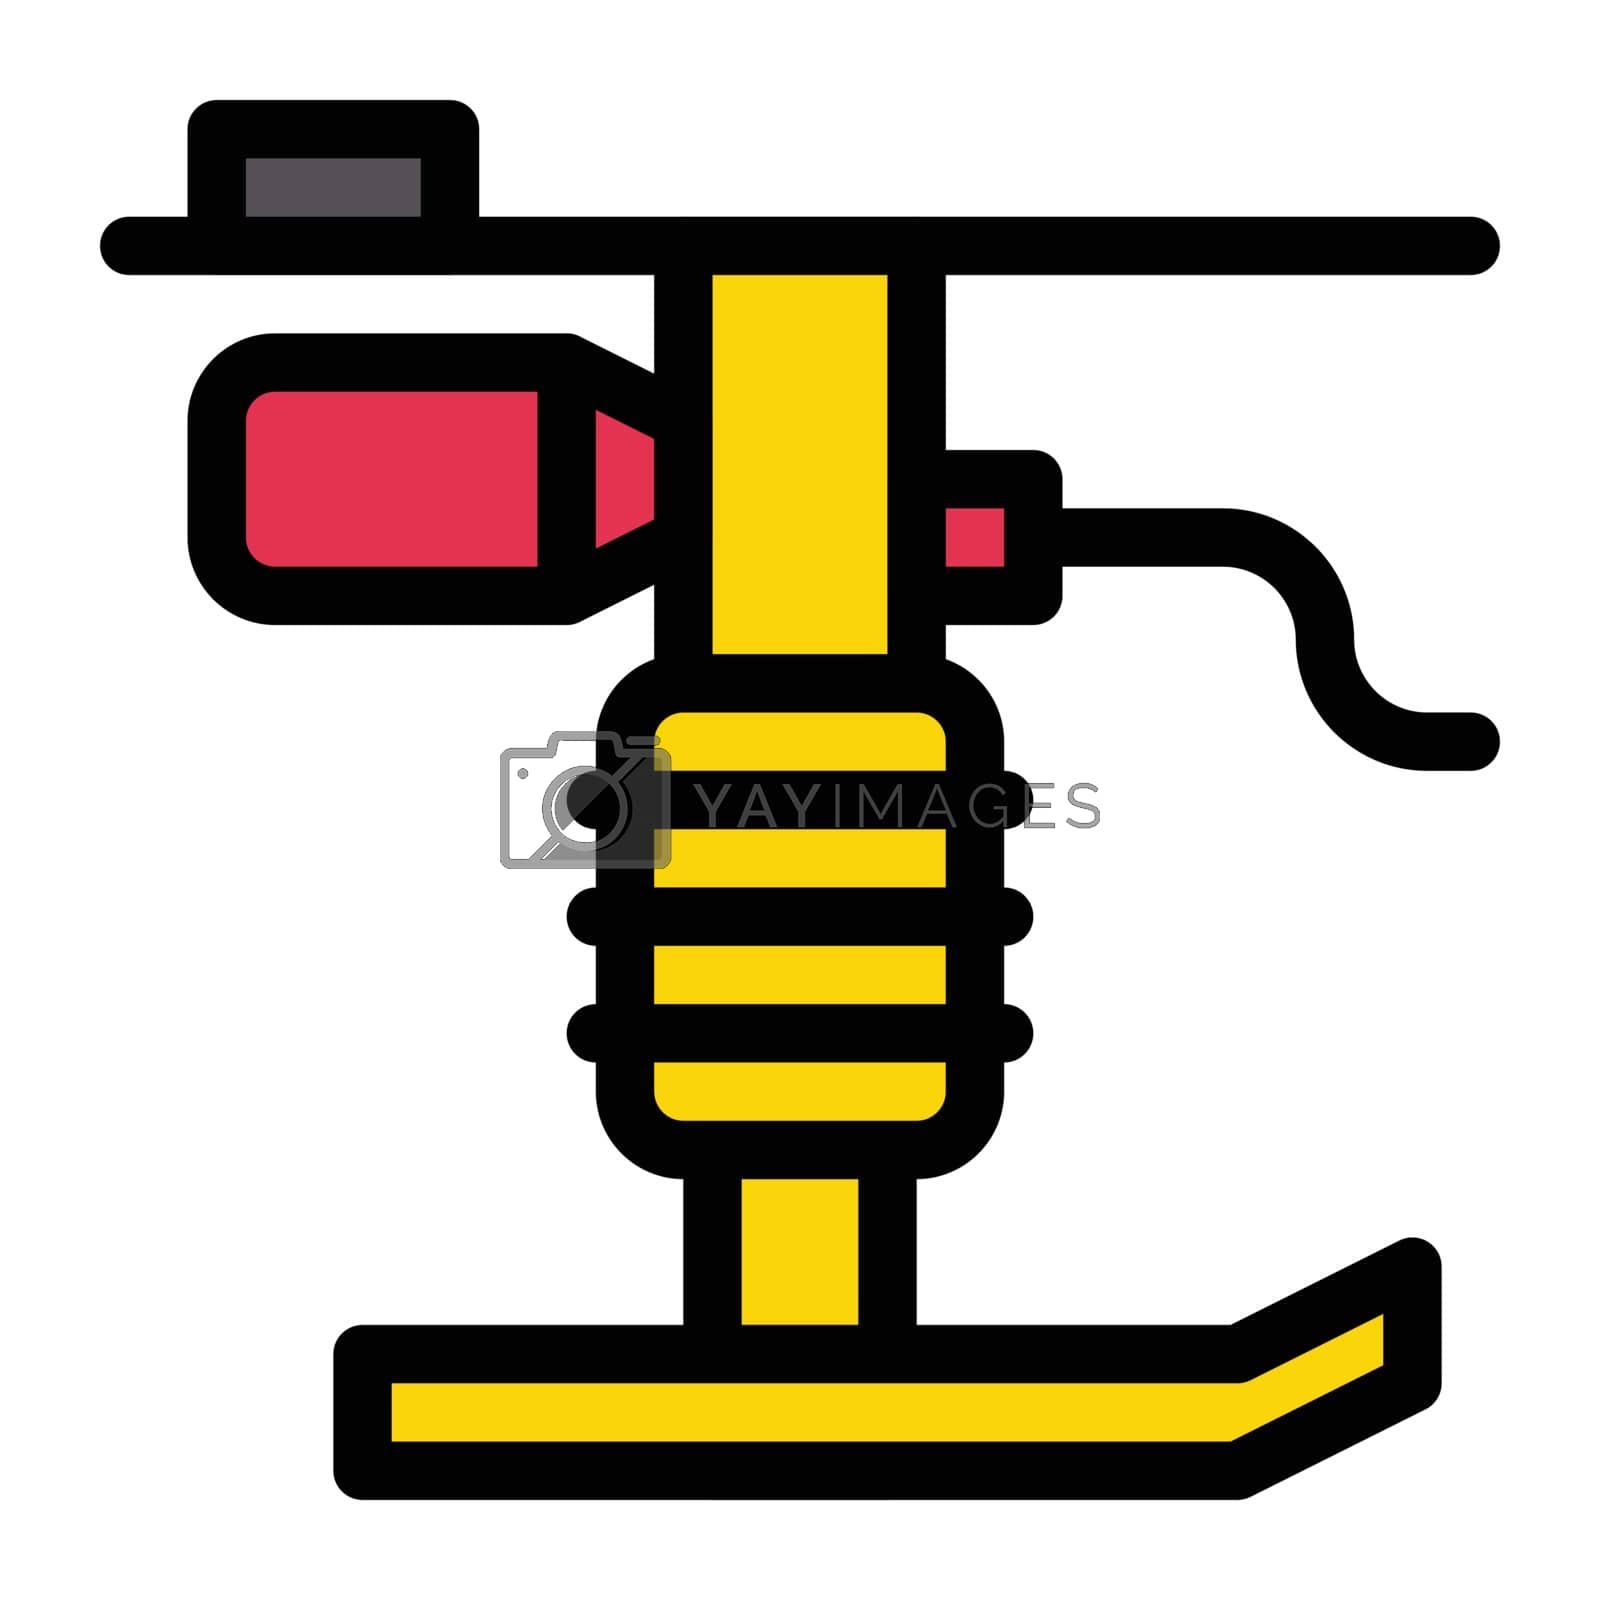 Royalty free image of maintenance by vectorstall